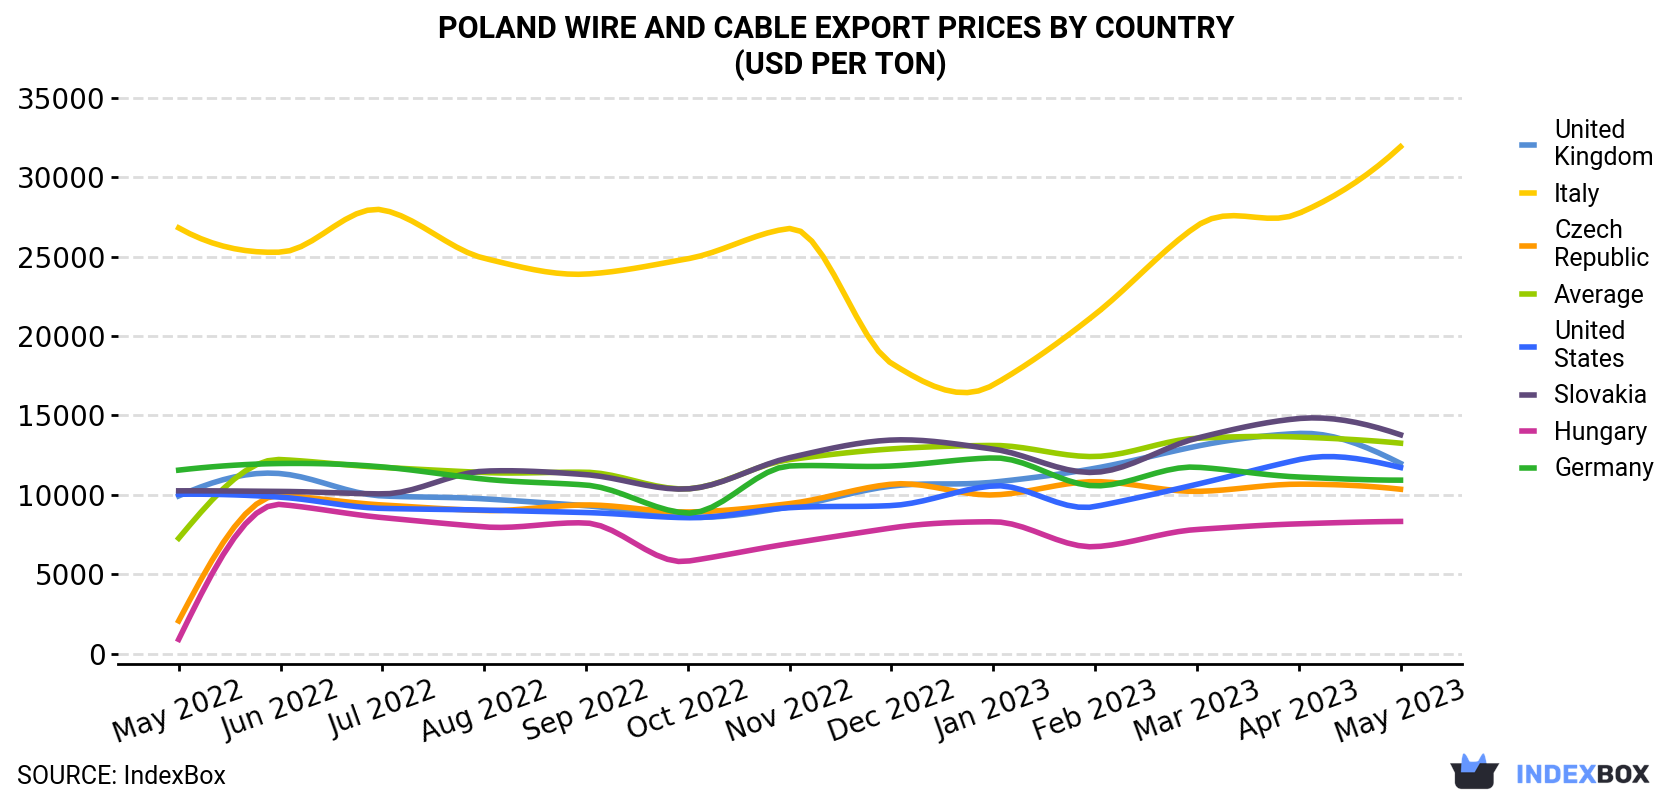 Poland Wire And Cable Export Prices By Country (USD Per Ton)